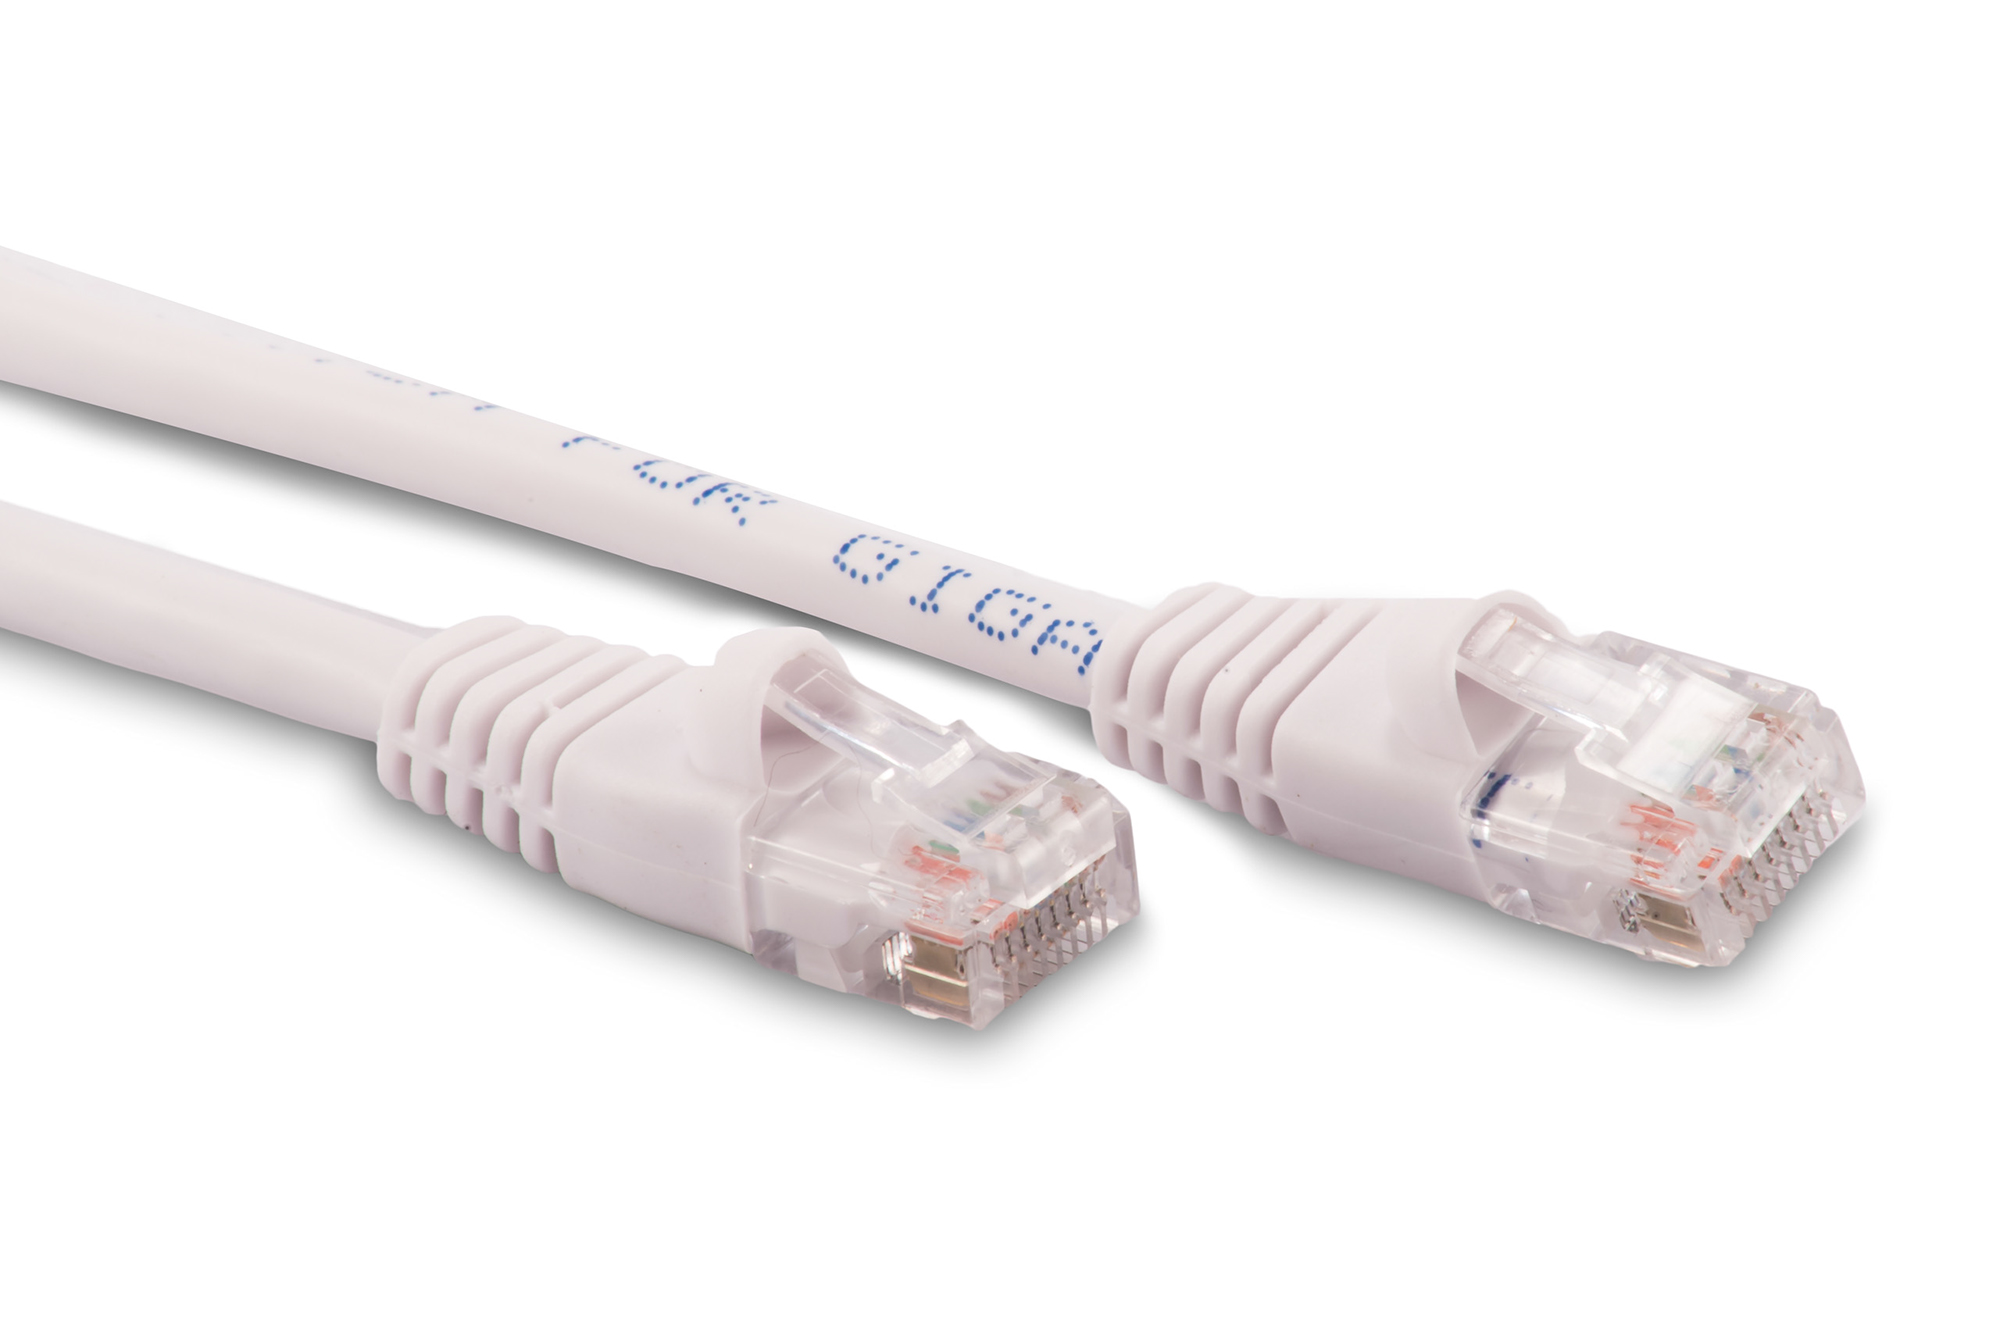 5ft Cat6 Ethernet Patch Cable - White Color - Snagless Boot, Stranded, RJ45, 550Mhz, 24AWG